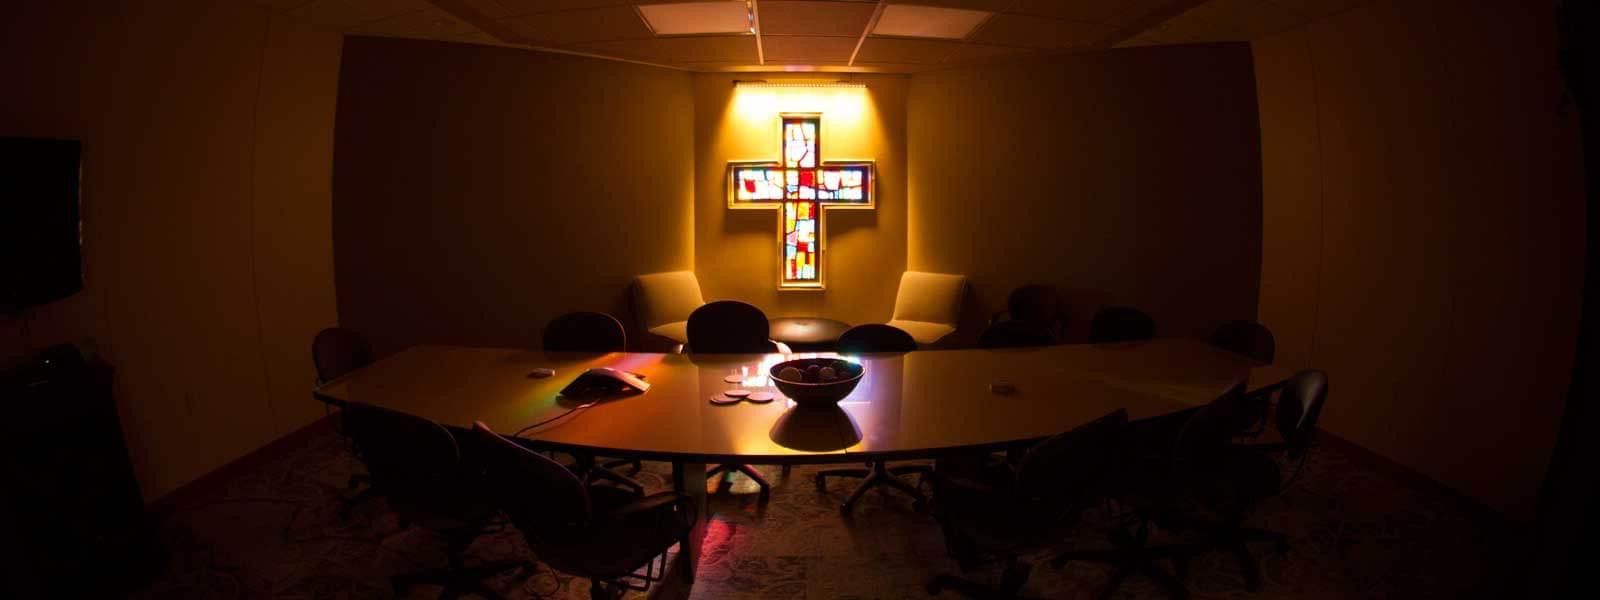 stained glass cross window in conference room